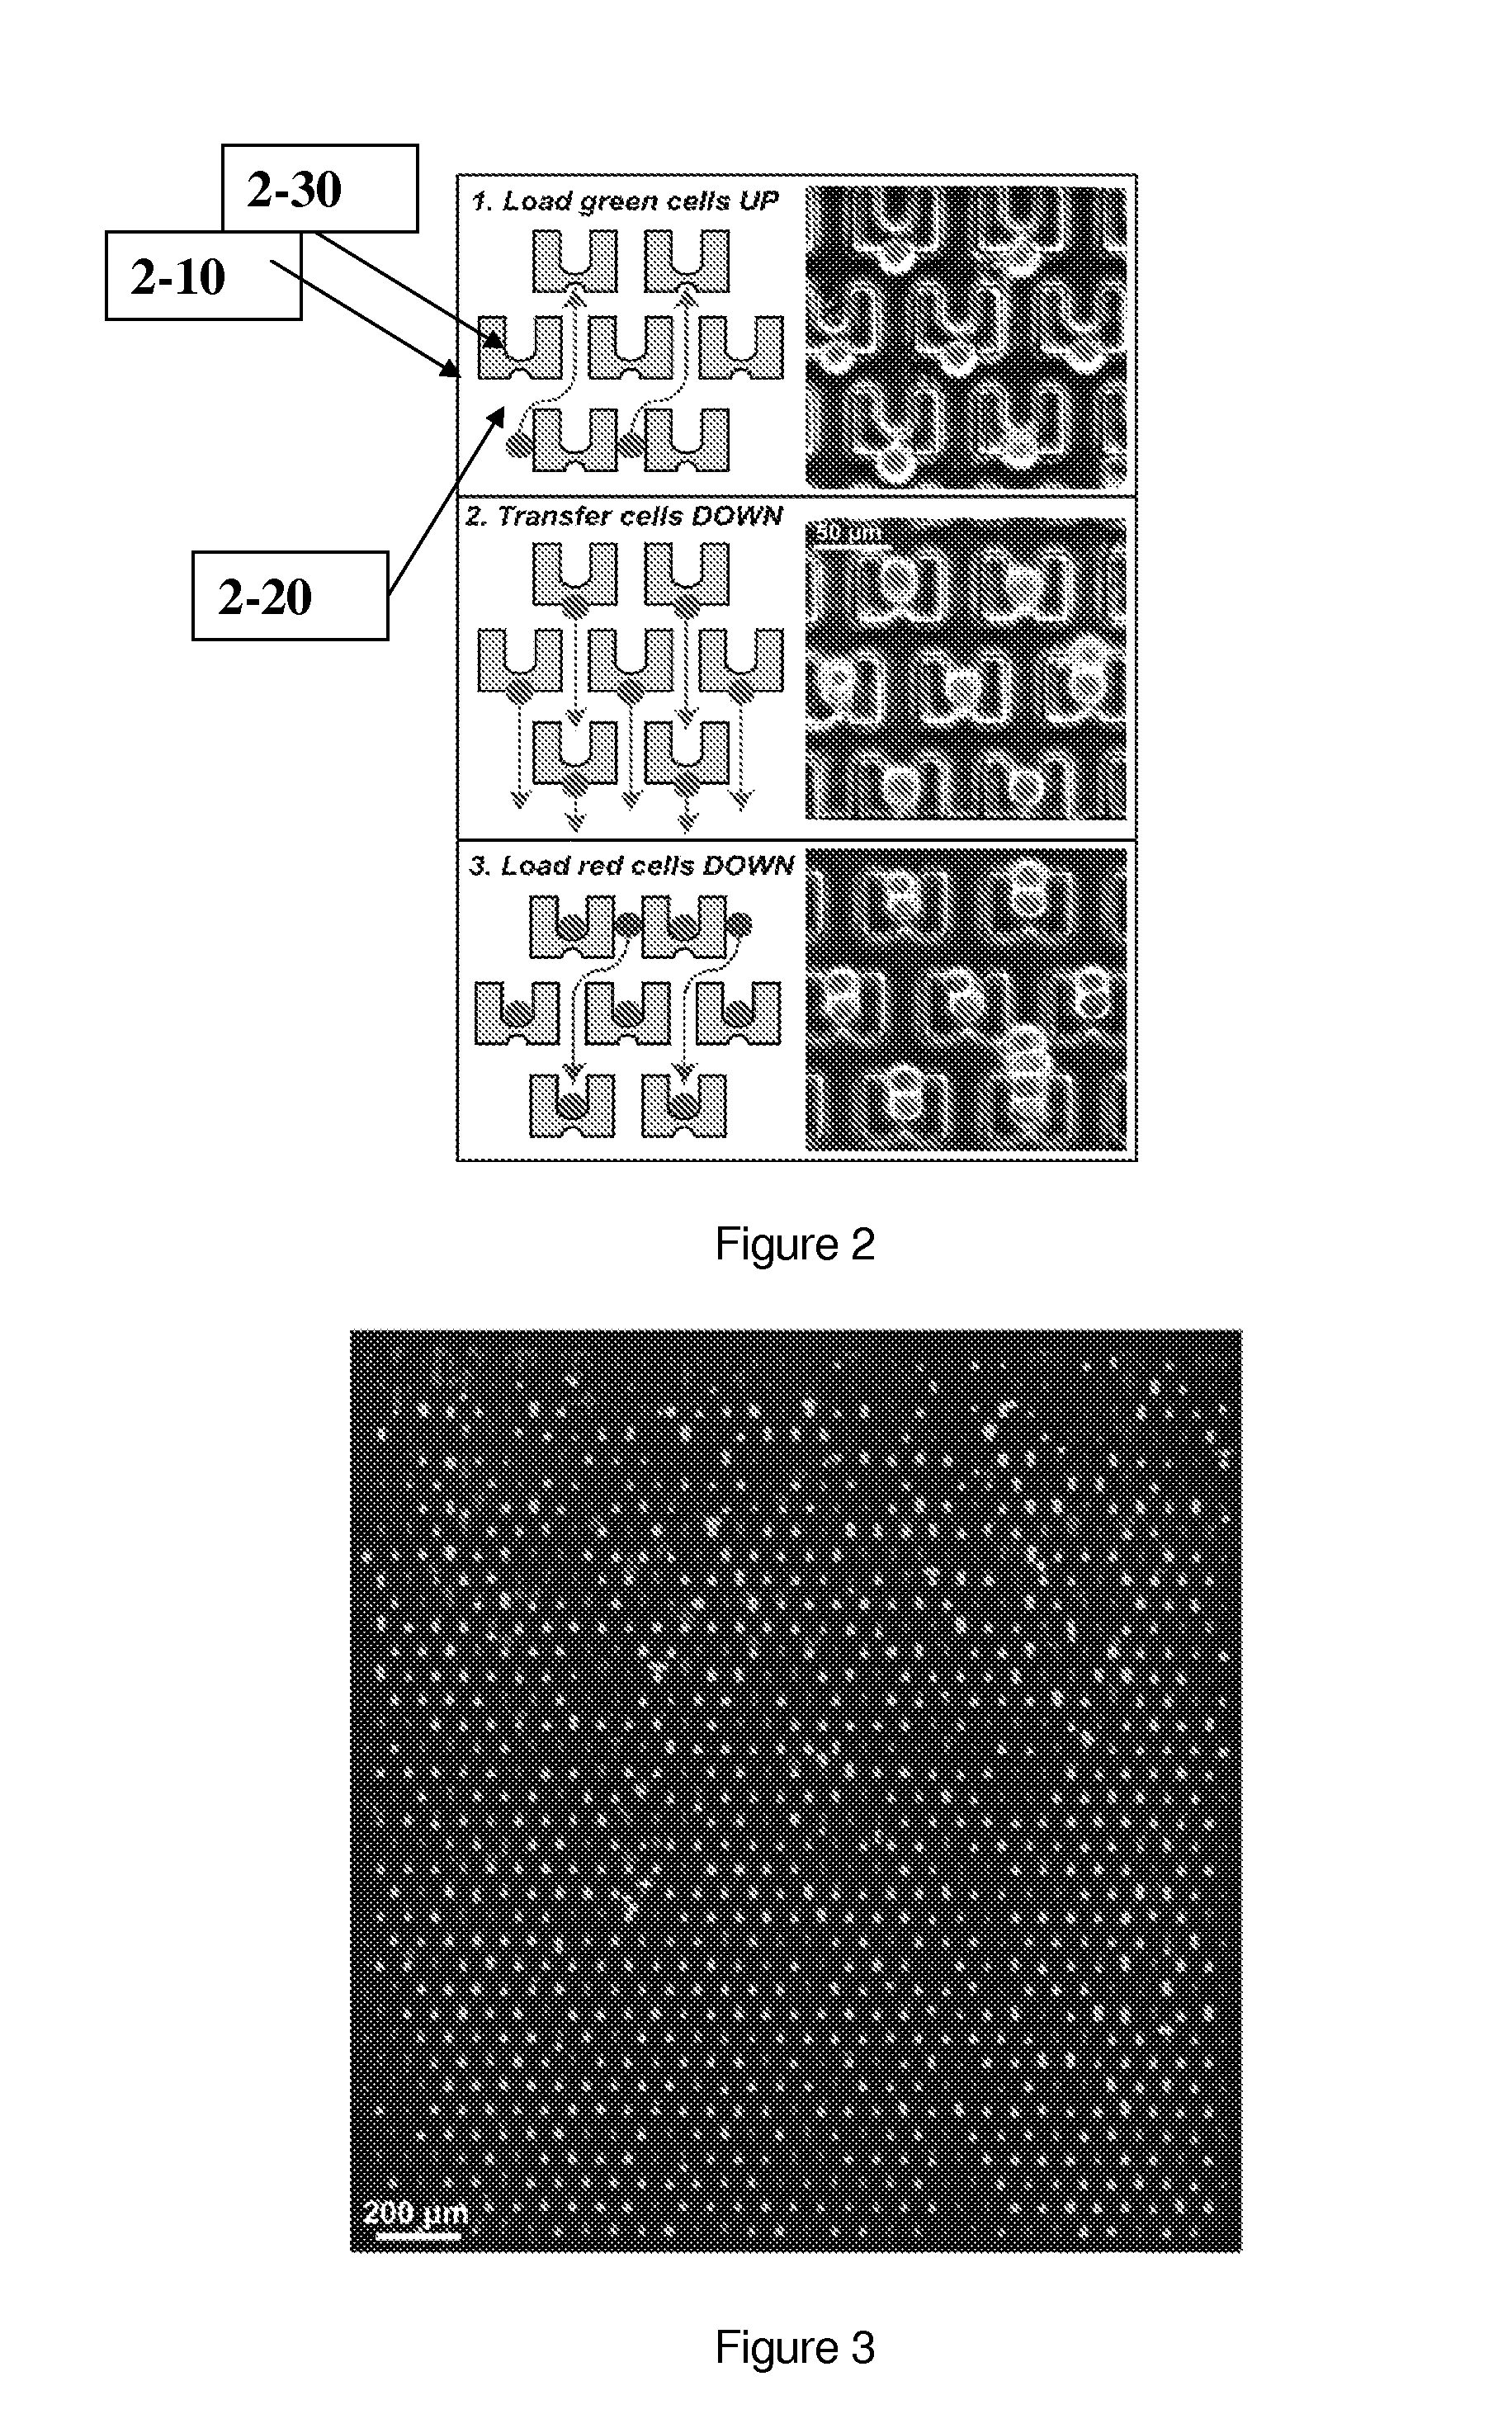 Particle capture devices and methods of use thereof